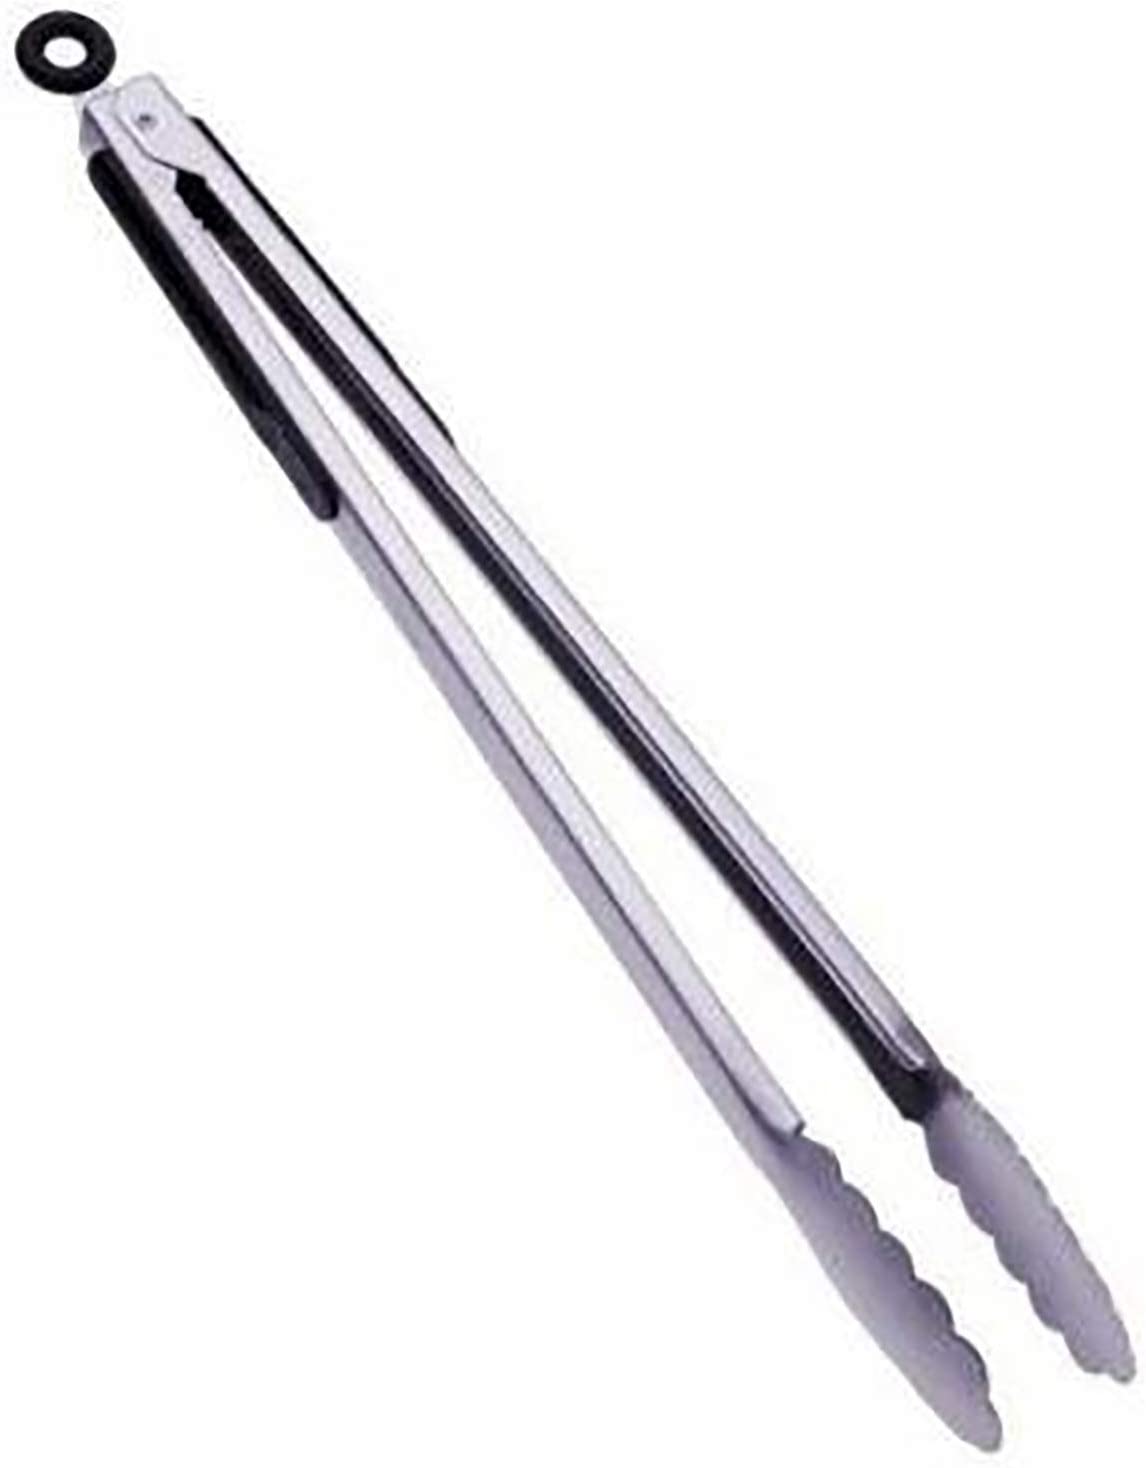 16-Inch Stainless Steel Tong